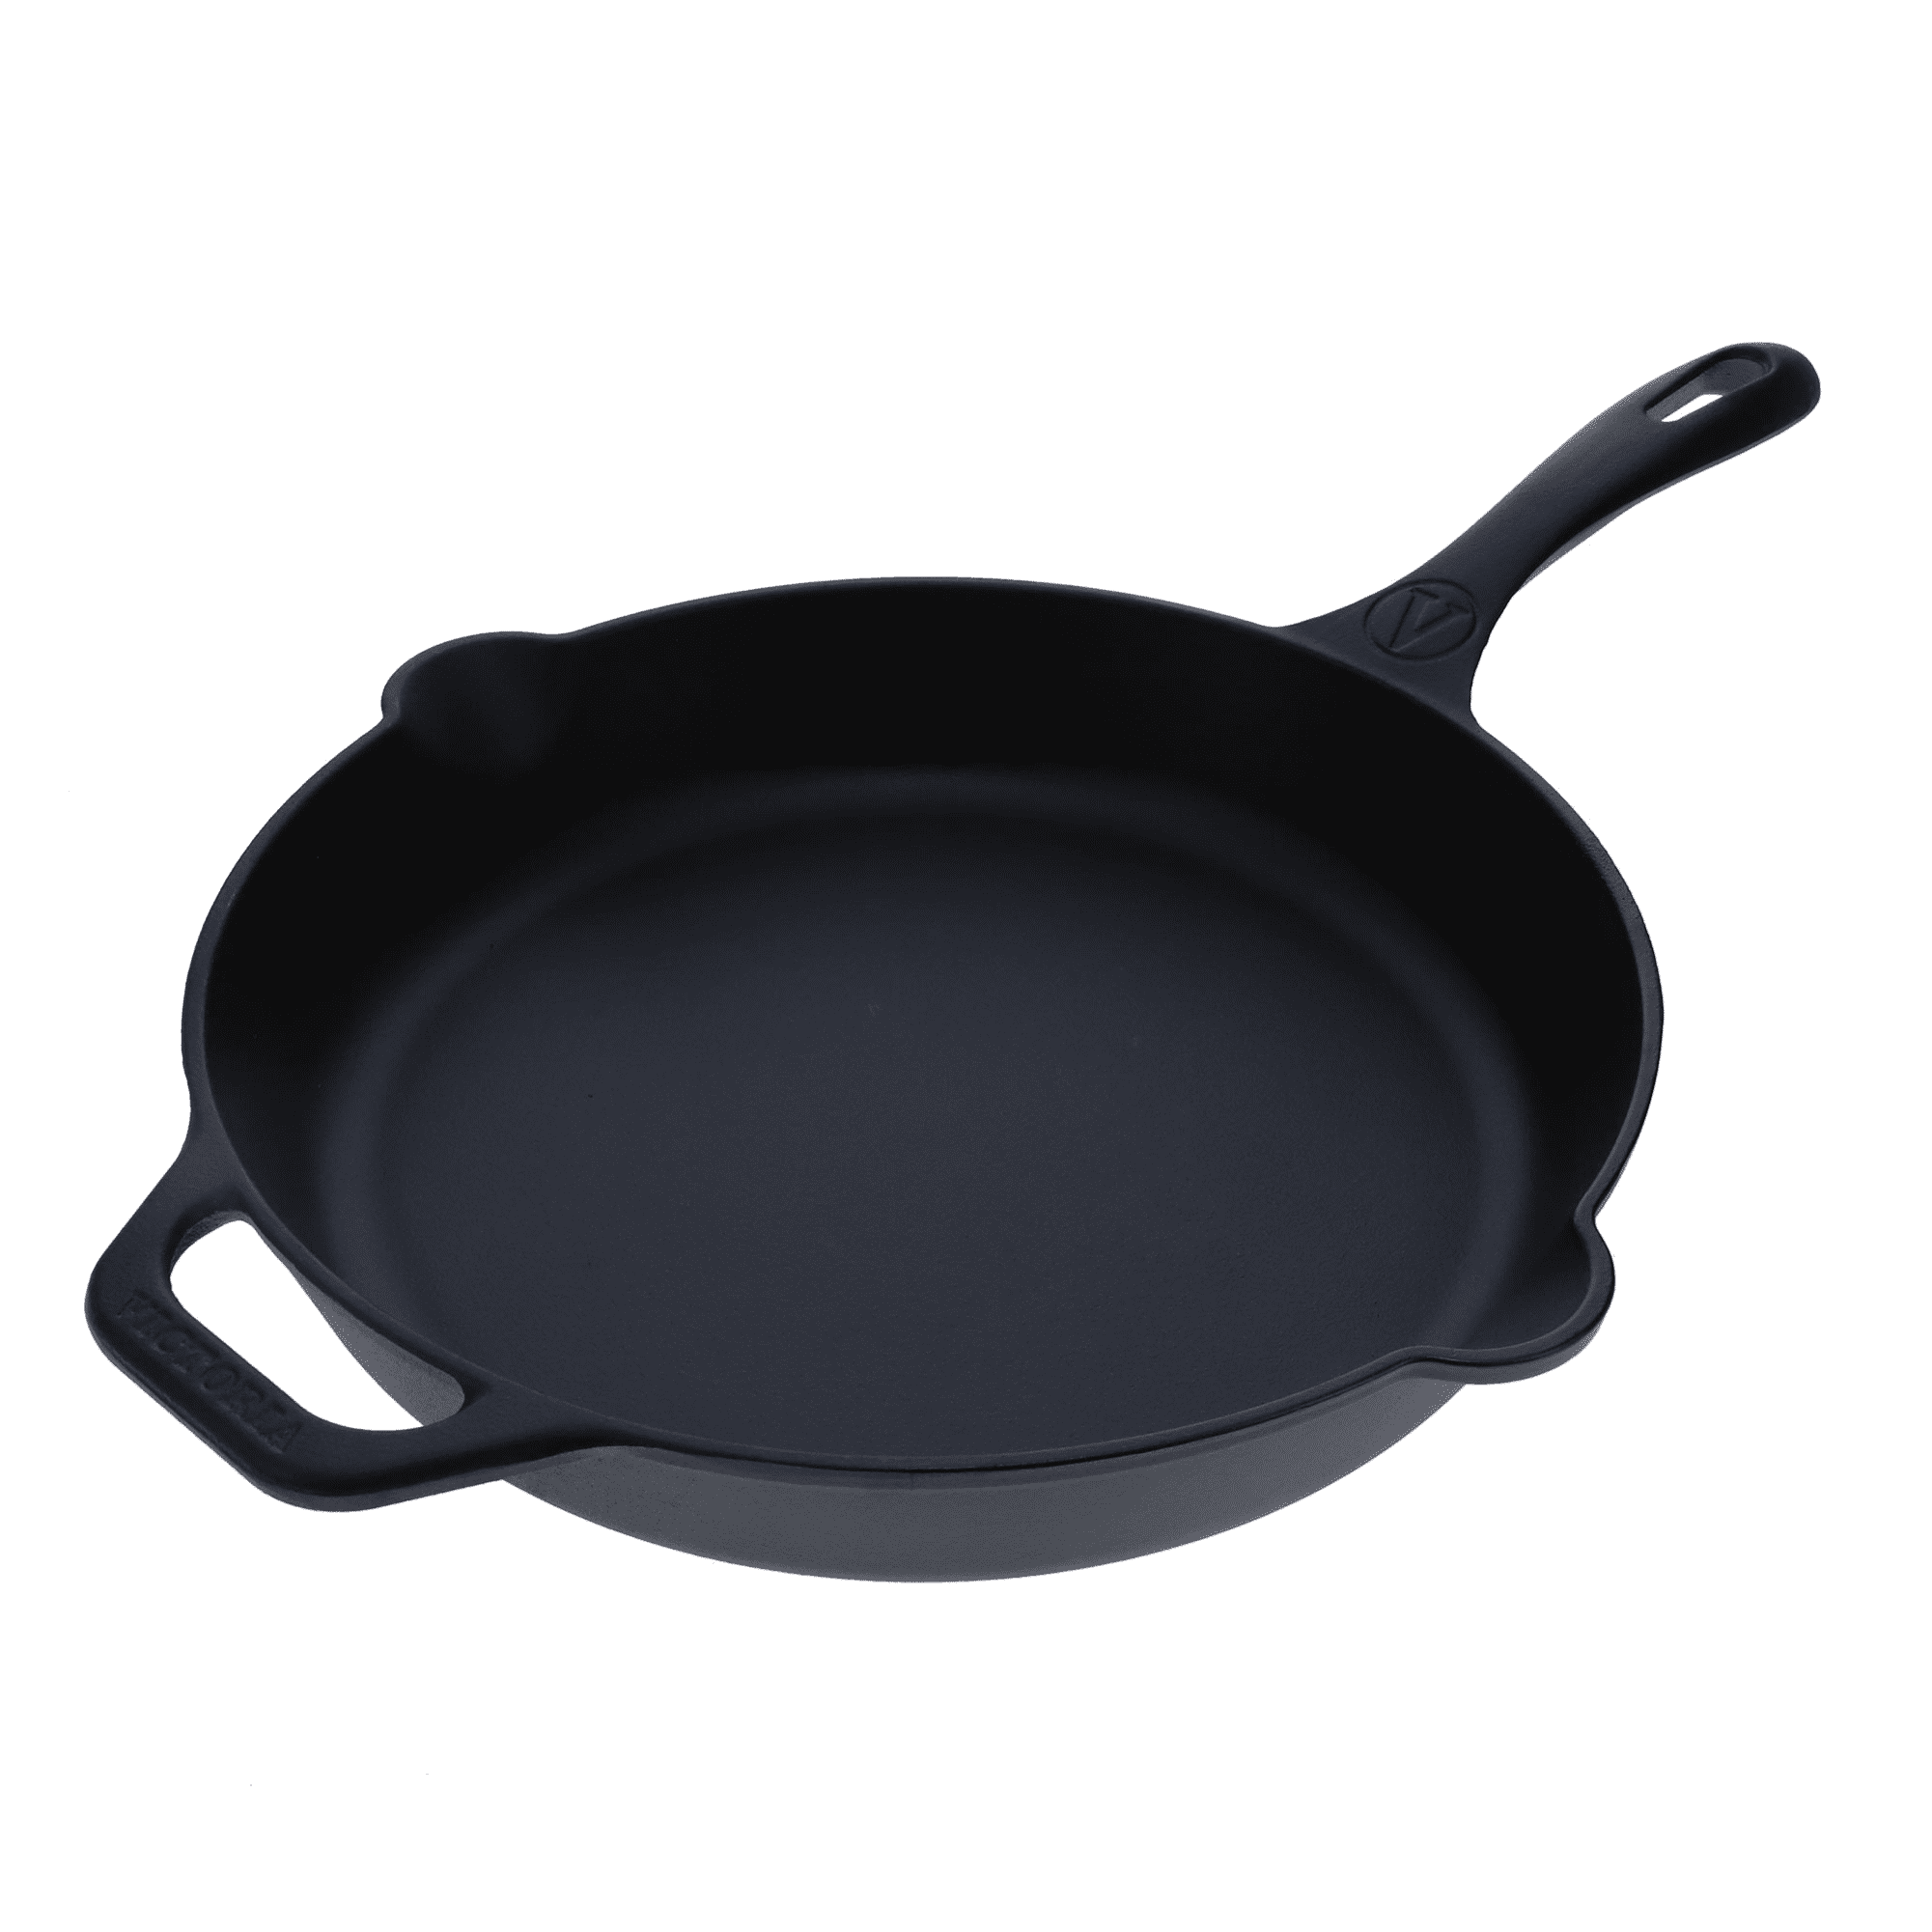 Victoria 12 Comal with Long Handle and Helper Handle, Seasoned